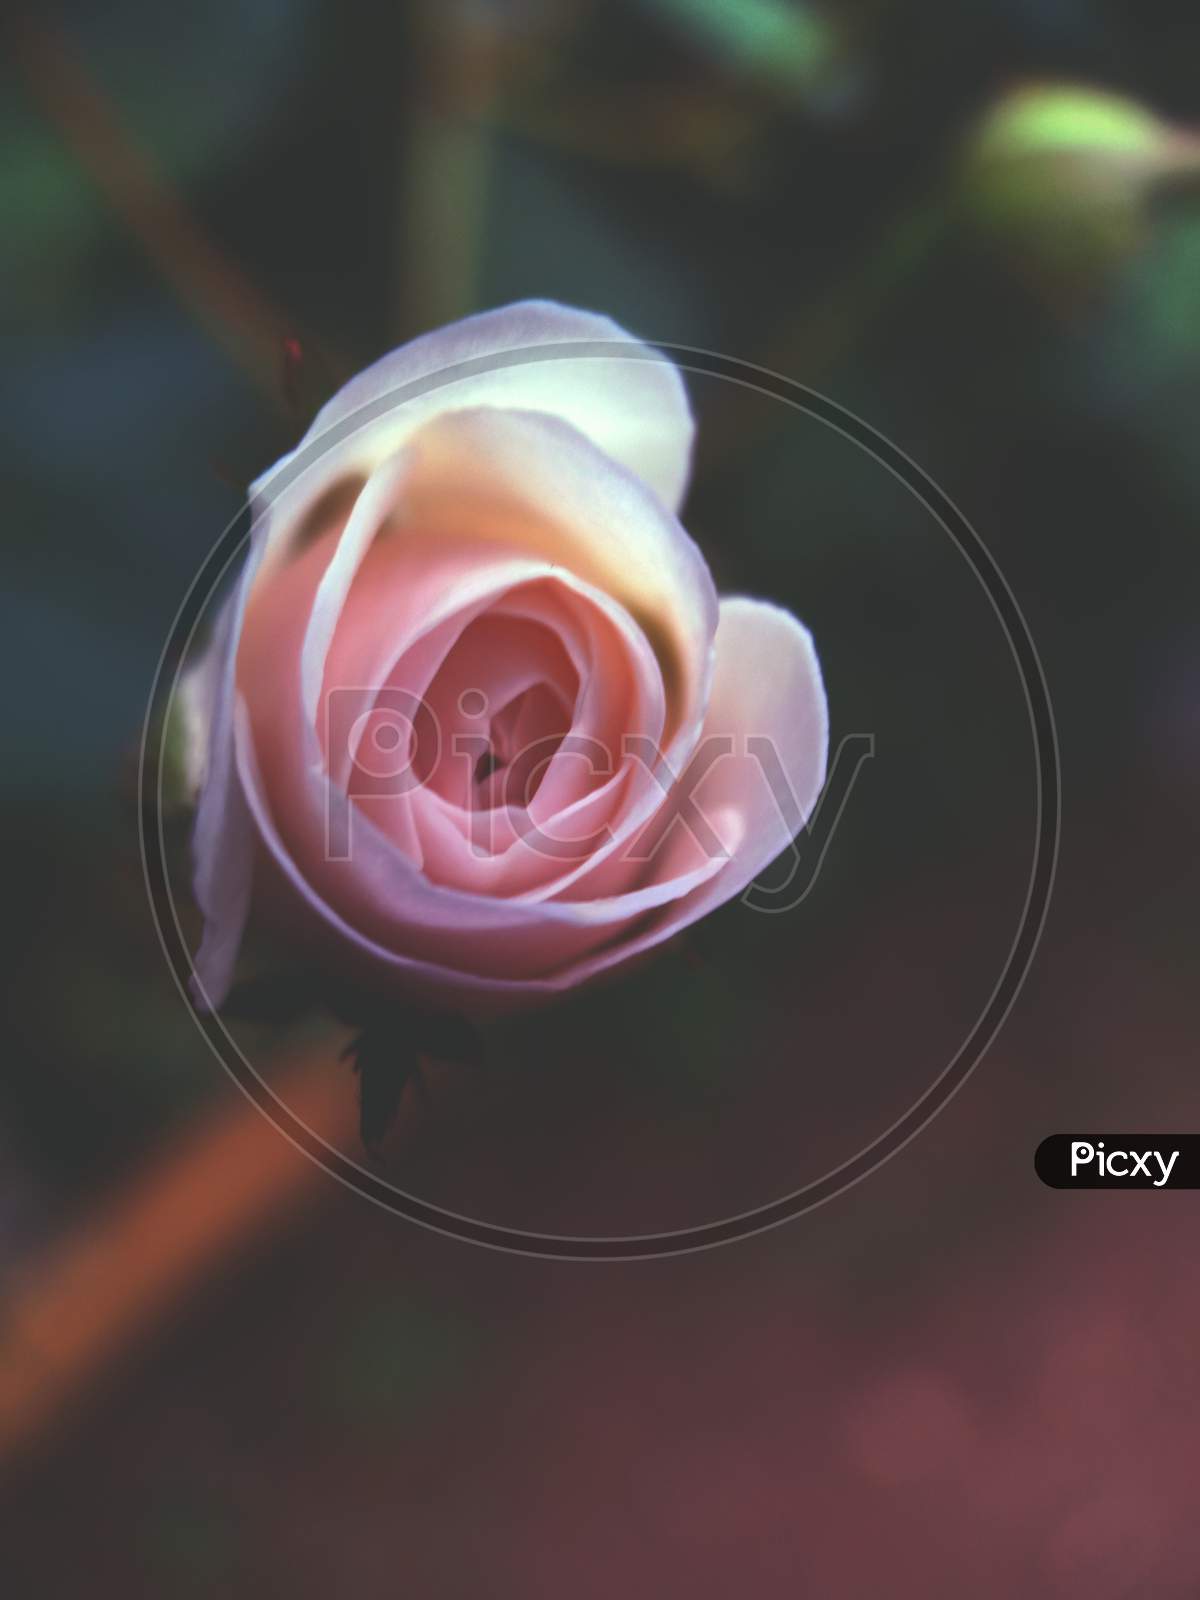 Rose Flower Isolated And Close Up View